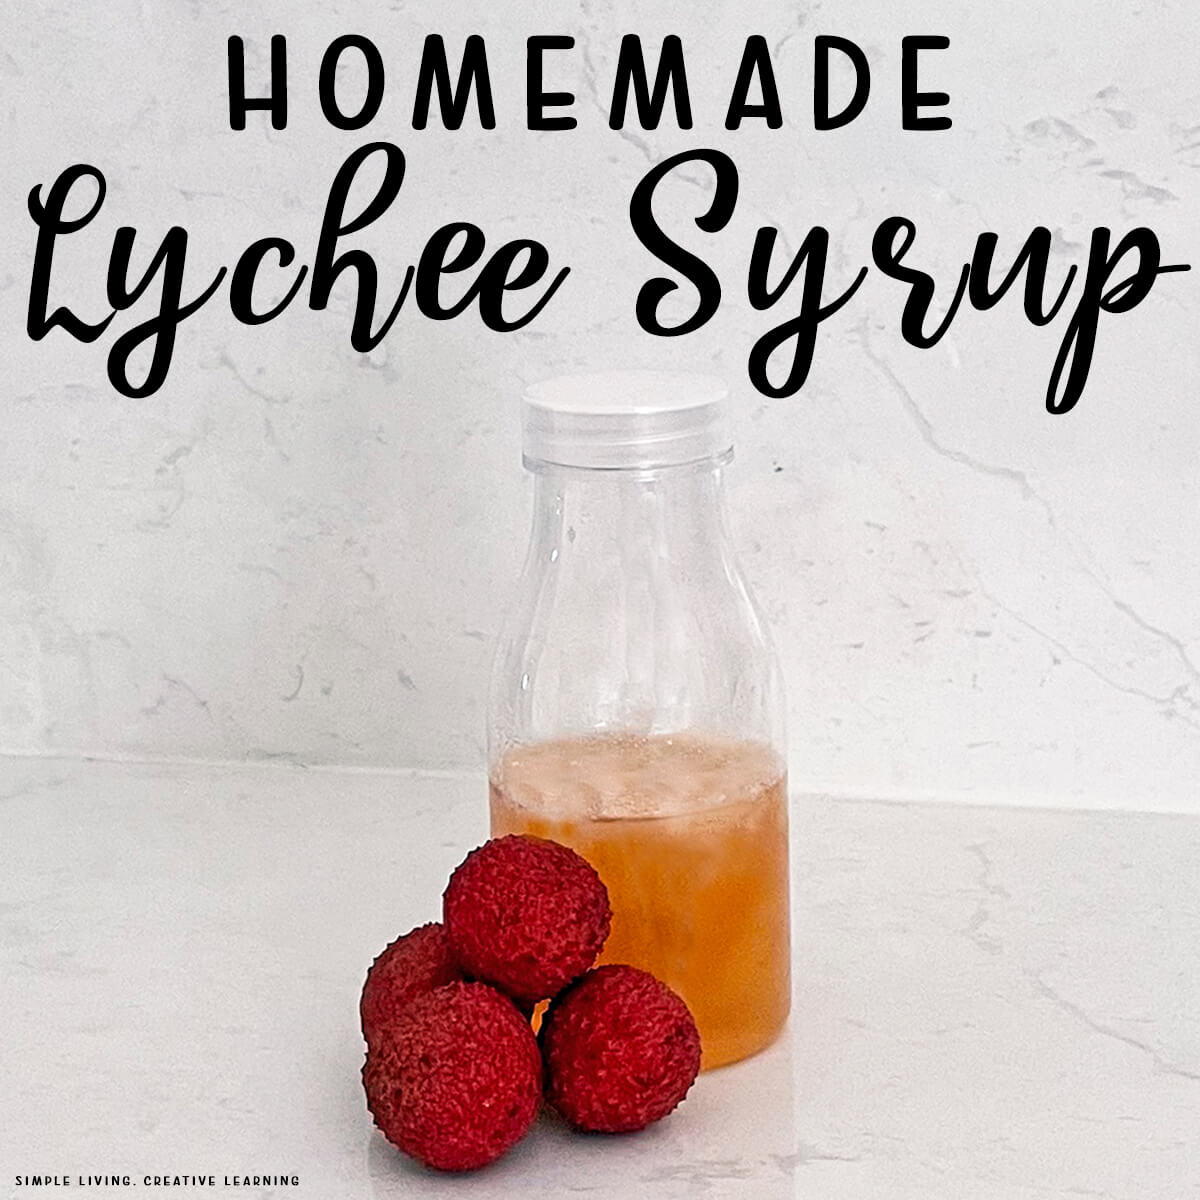 Homemade Lychee Syrup in a bottle with four lychees